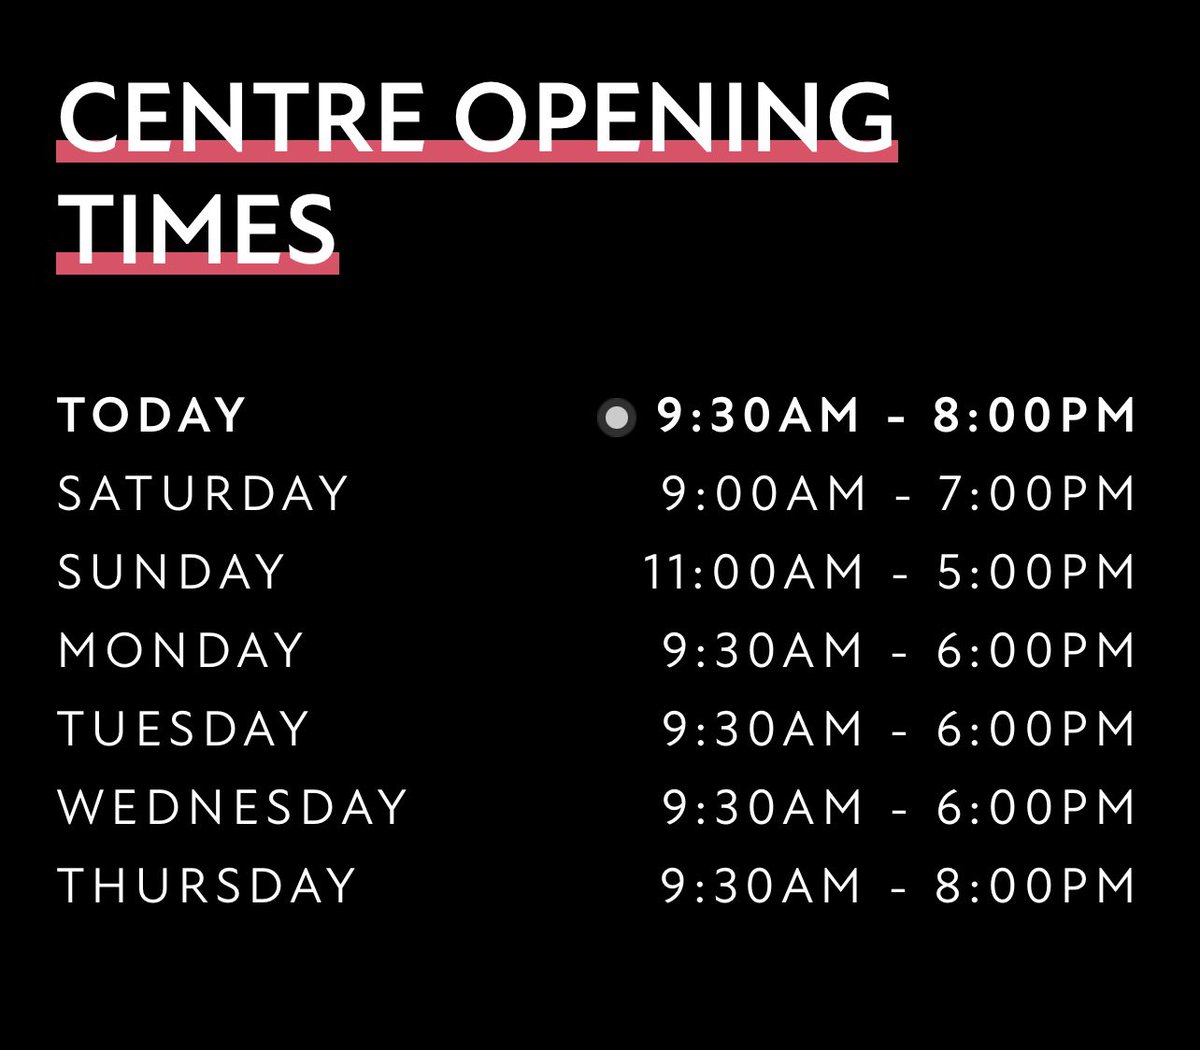 Do you know our bank holiday opening hours? 👀

#Openinghours #midsummerplace